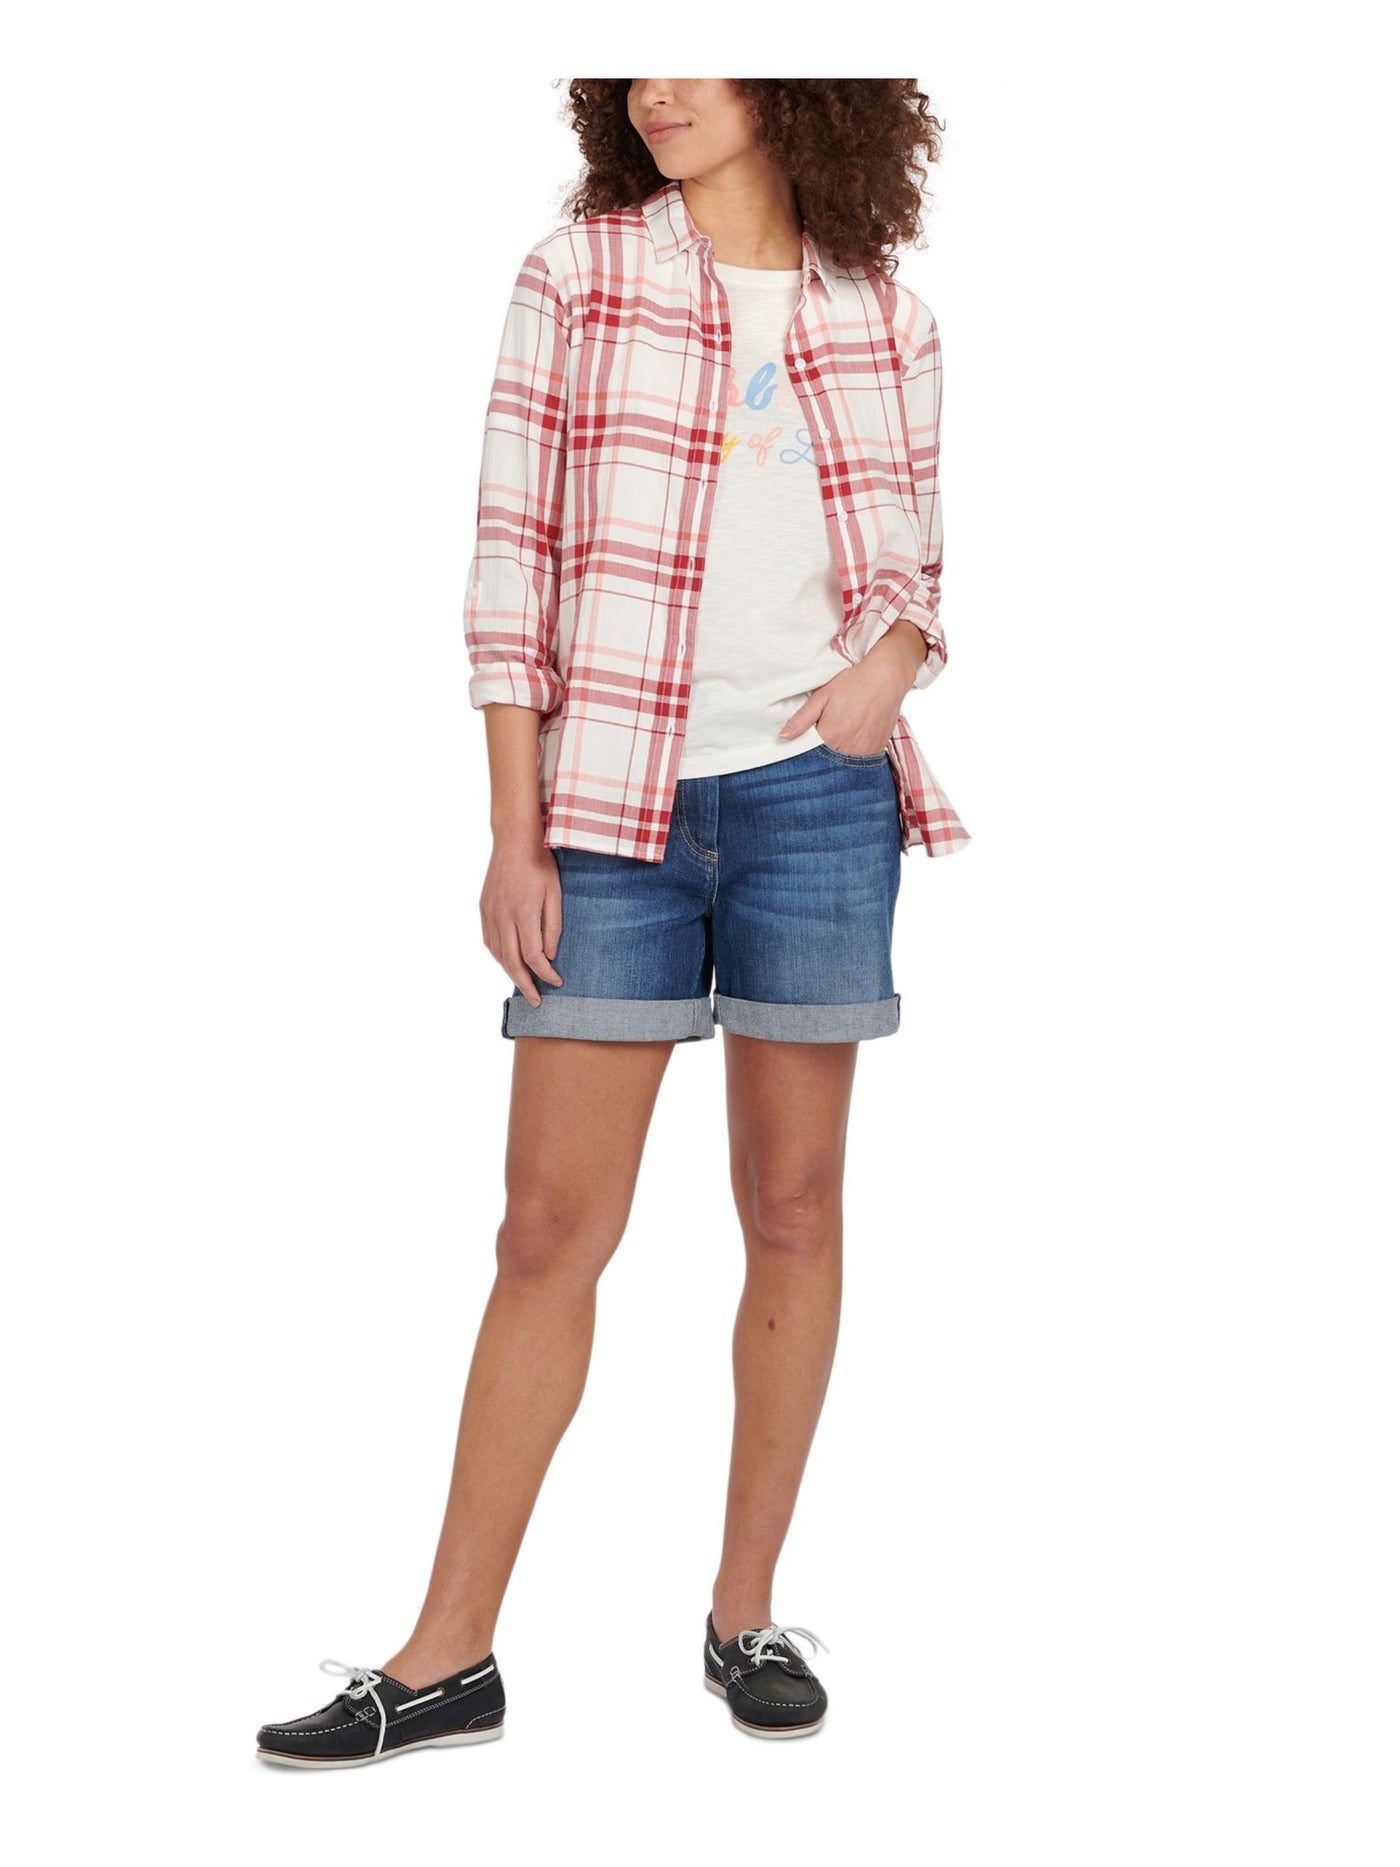 BARBOUR Womens Red Plaid Cuffed Sleeve Collared Button Up Top 10